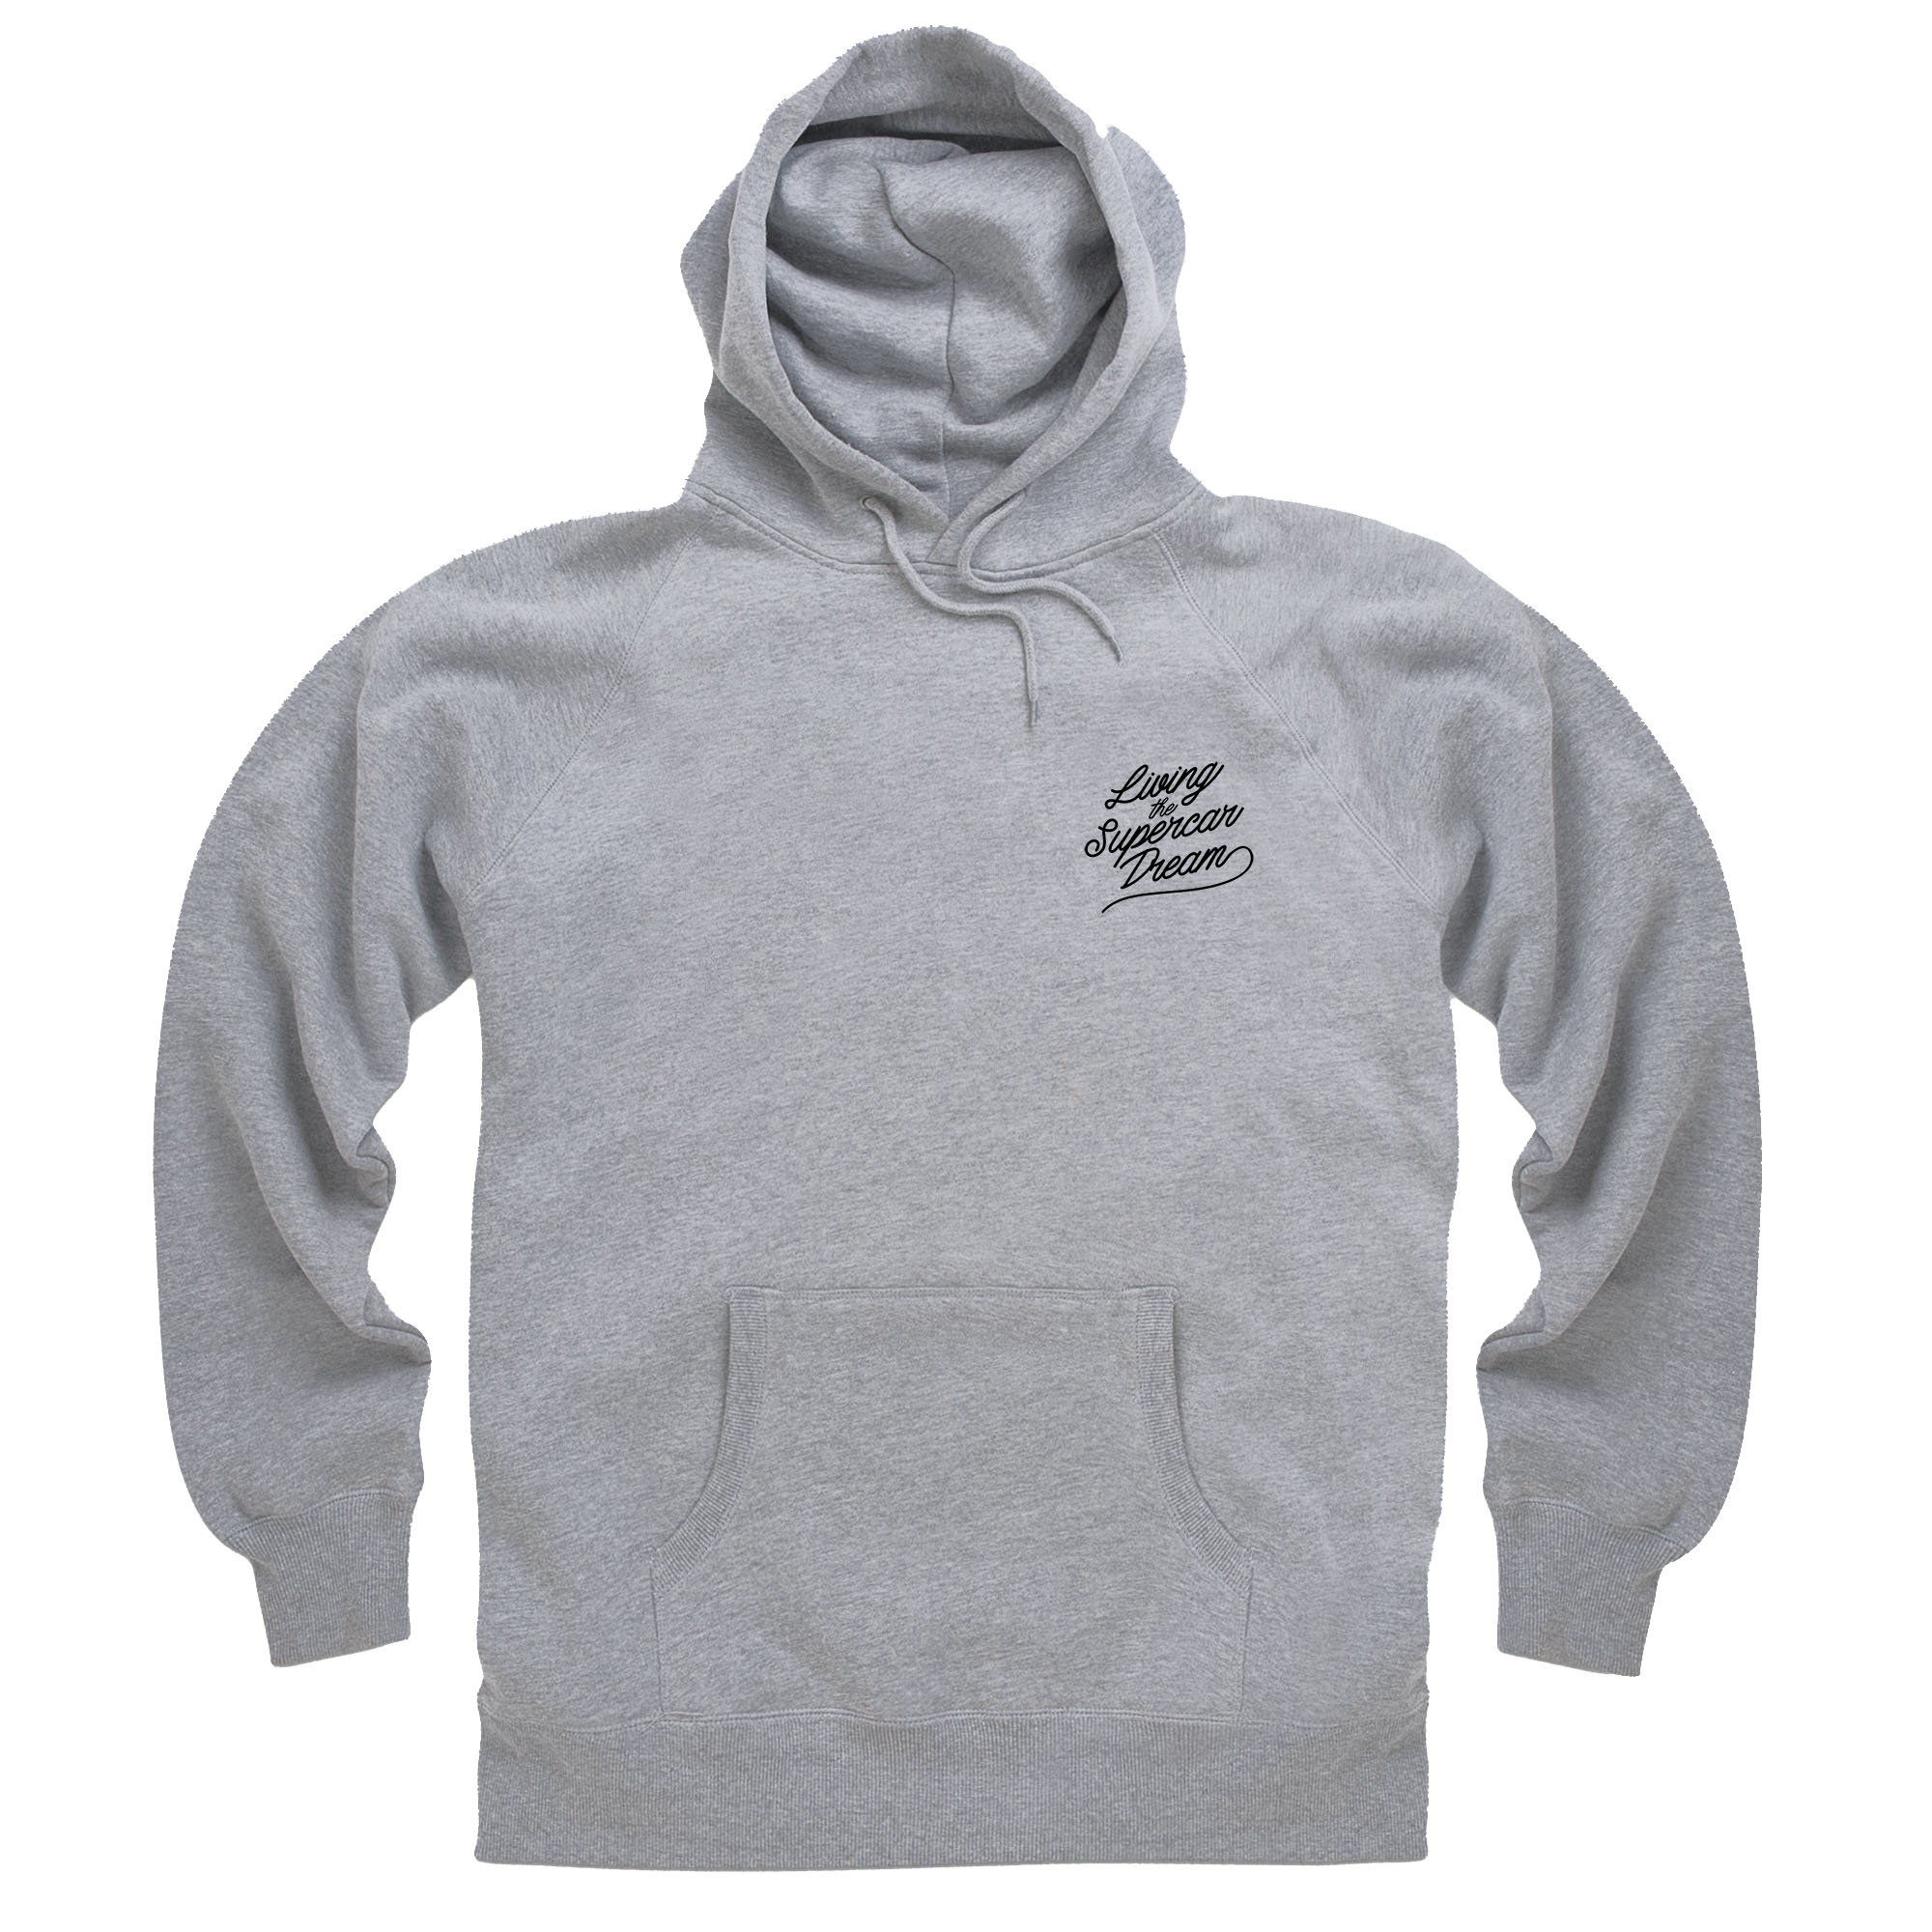 Living The Supercar Dream - Hoodie - Black Outline - Adults - Shmee150 ...